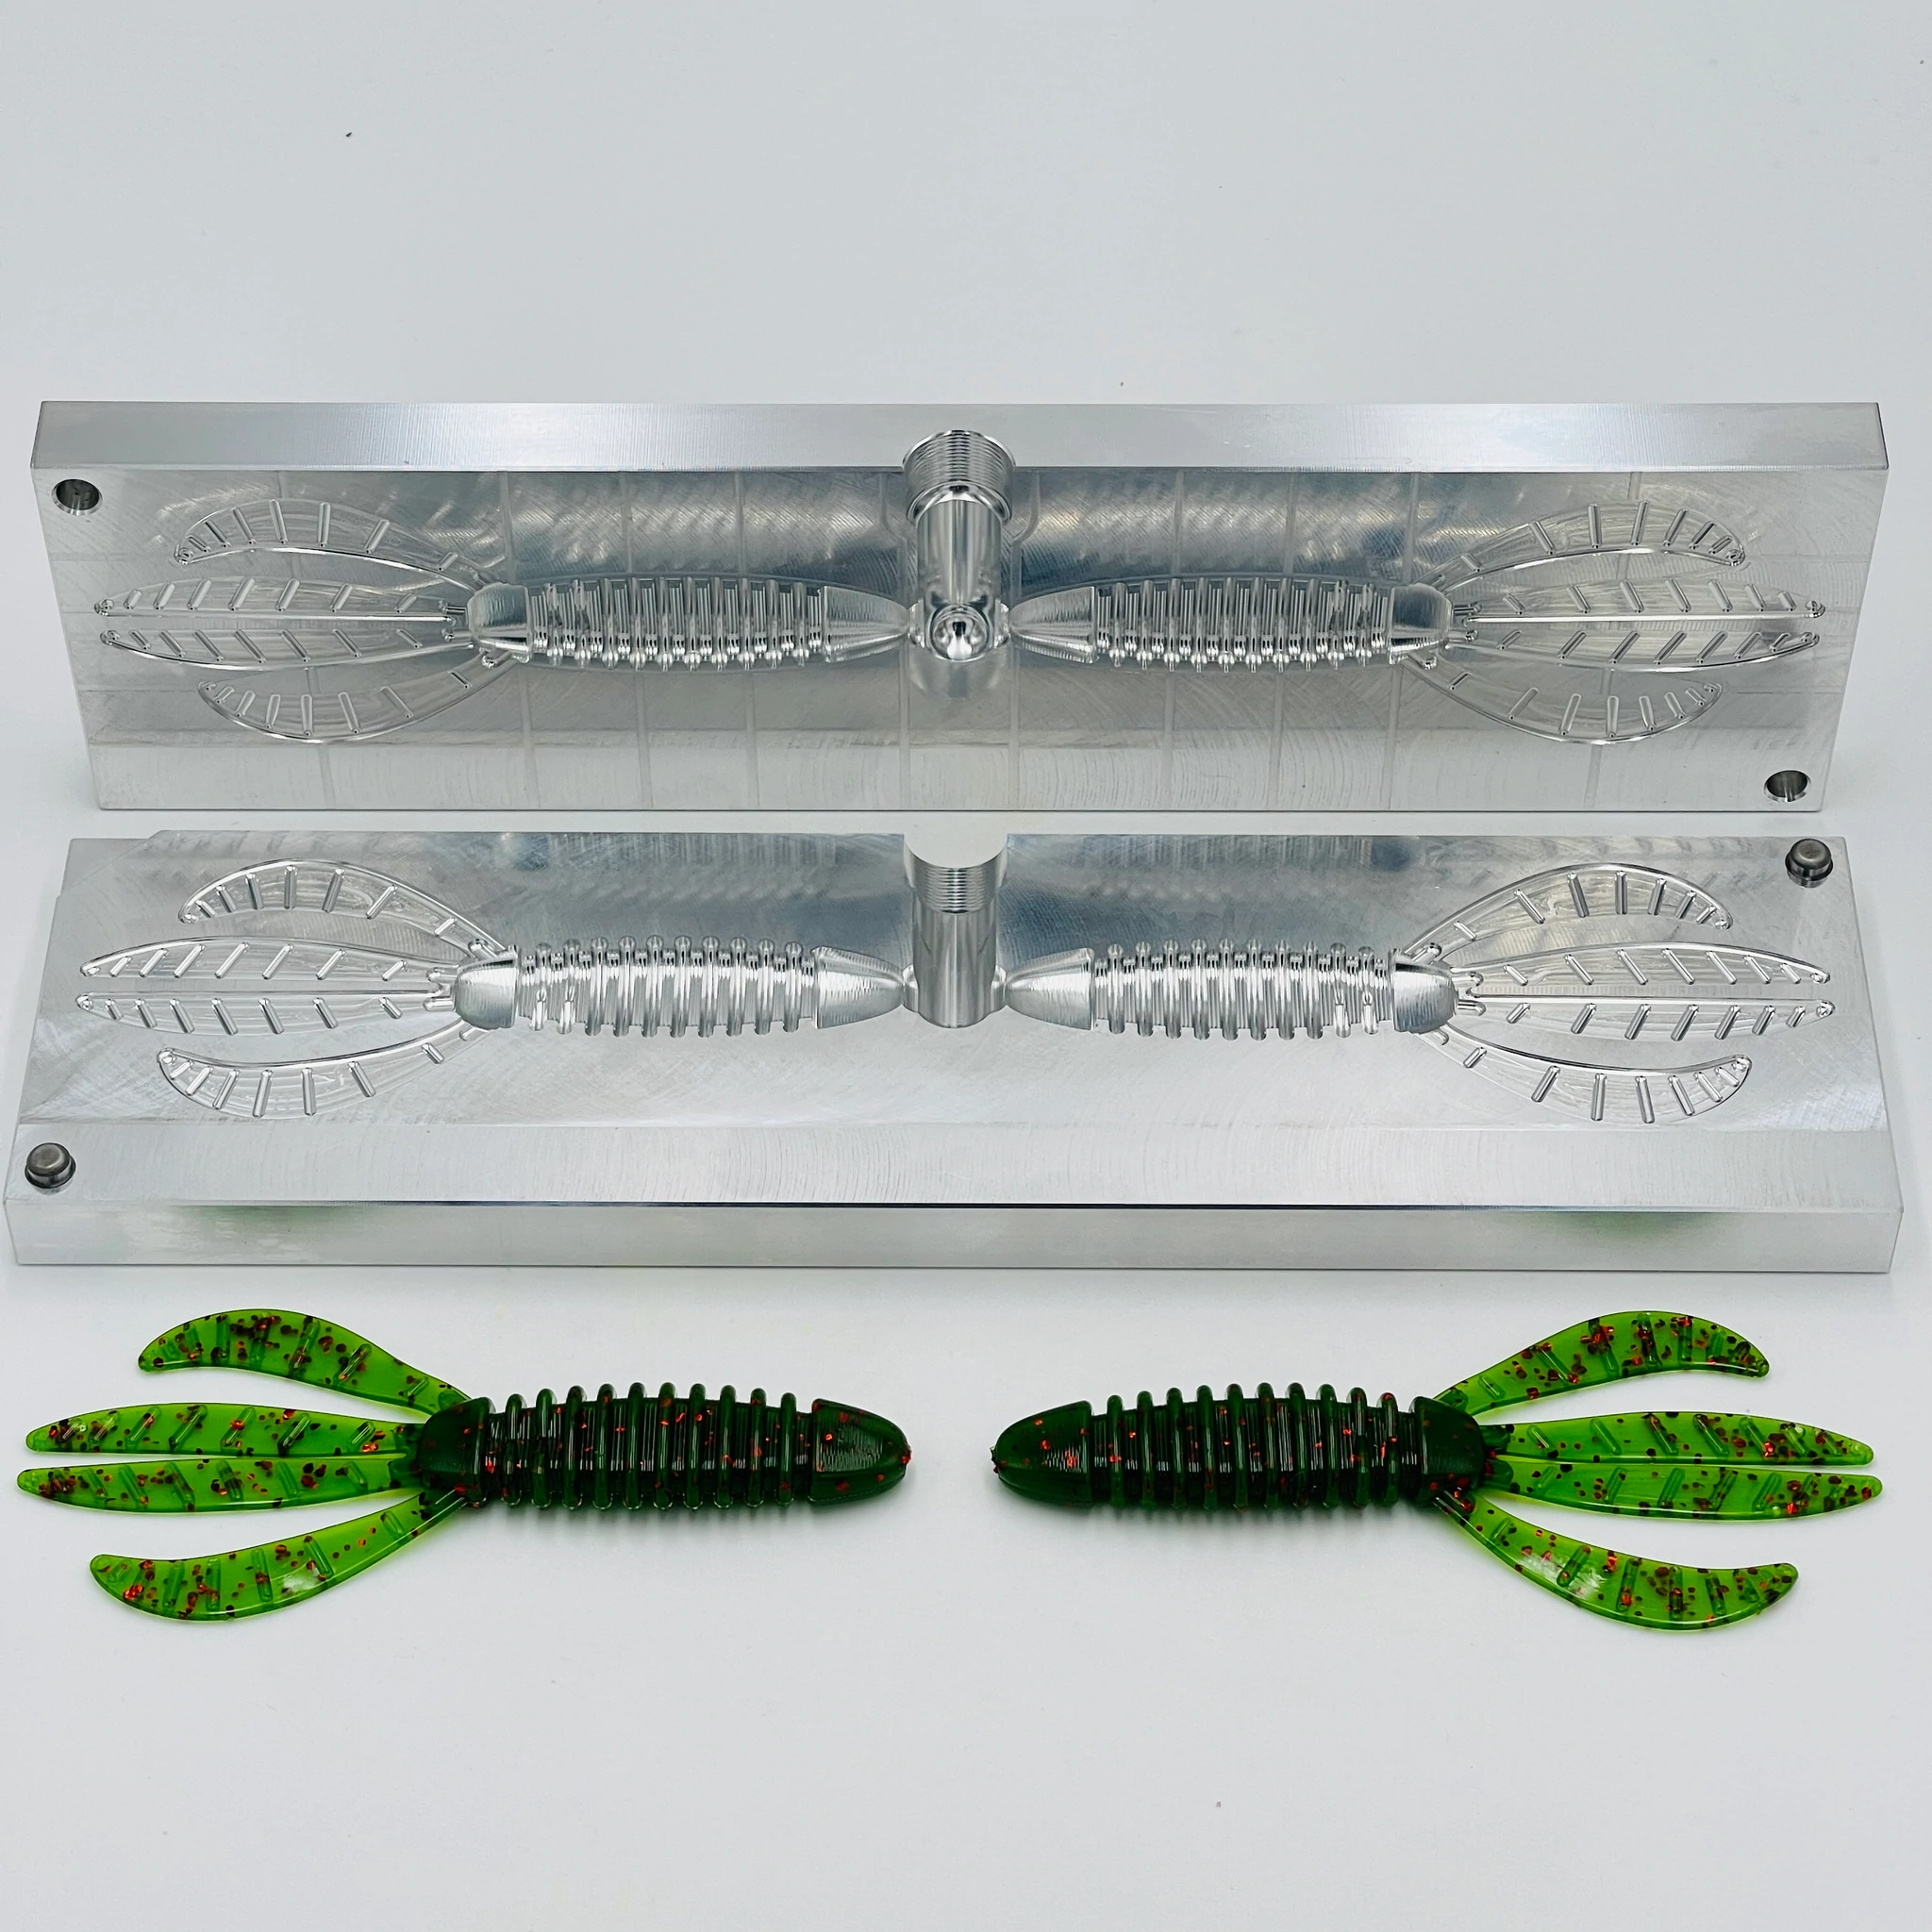 Soft Lure Injection Mold for Dfin Swimbait Fishing Paddle Tail Bait DIY  Soft Plastic Bait